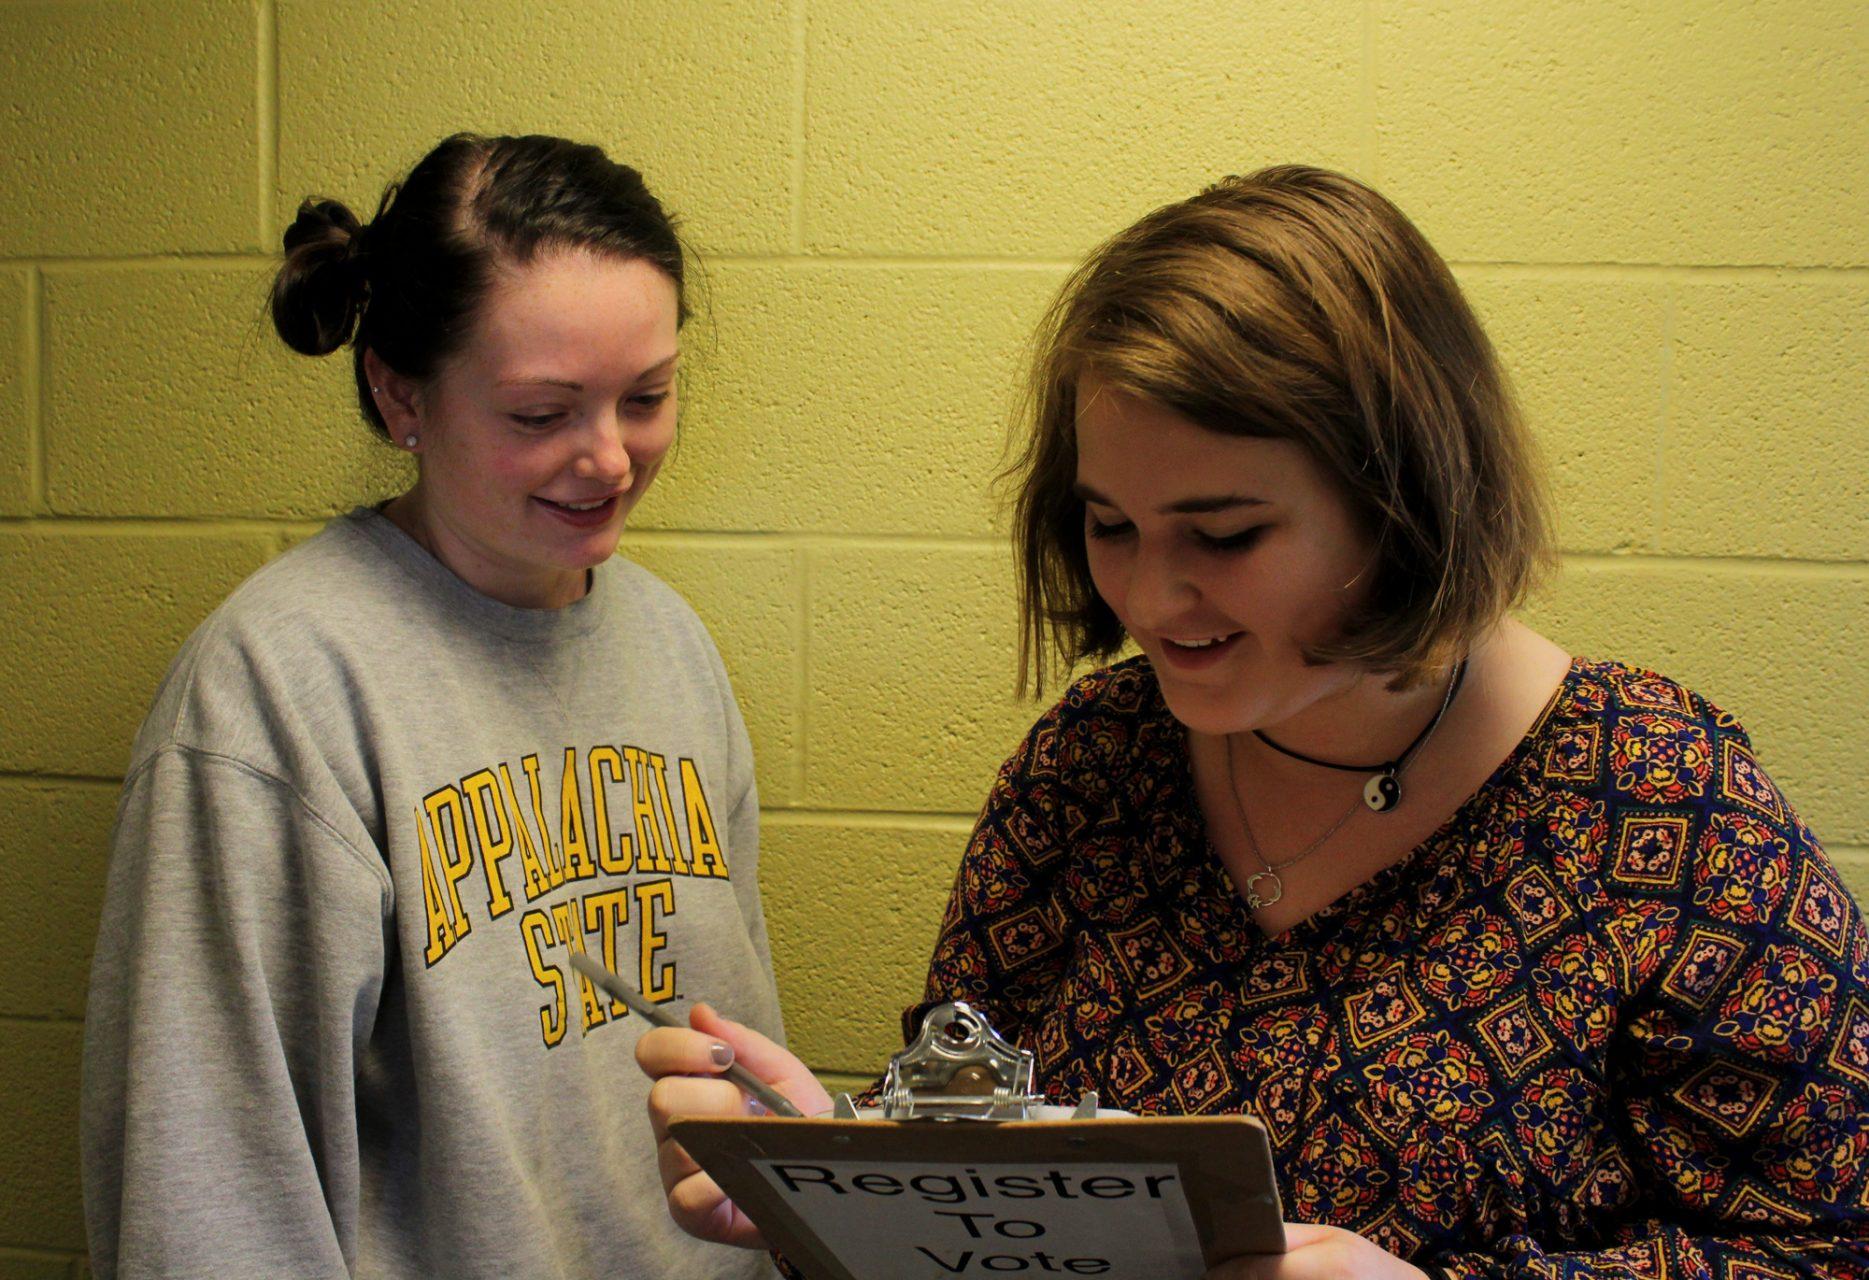 Freshman Maggie Behm helping Junior Logan Vann register to vote. There were several efforts throughout the month of September to register Appalachian students to vote in the upcoming Mayor and Town Council elections in November.